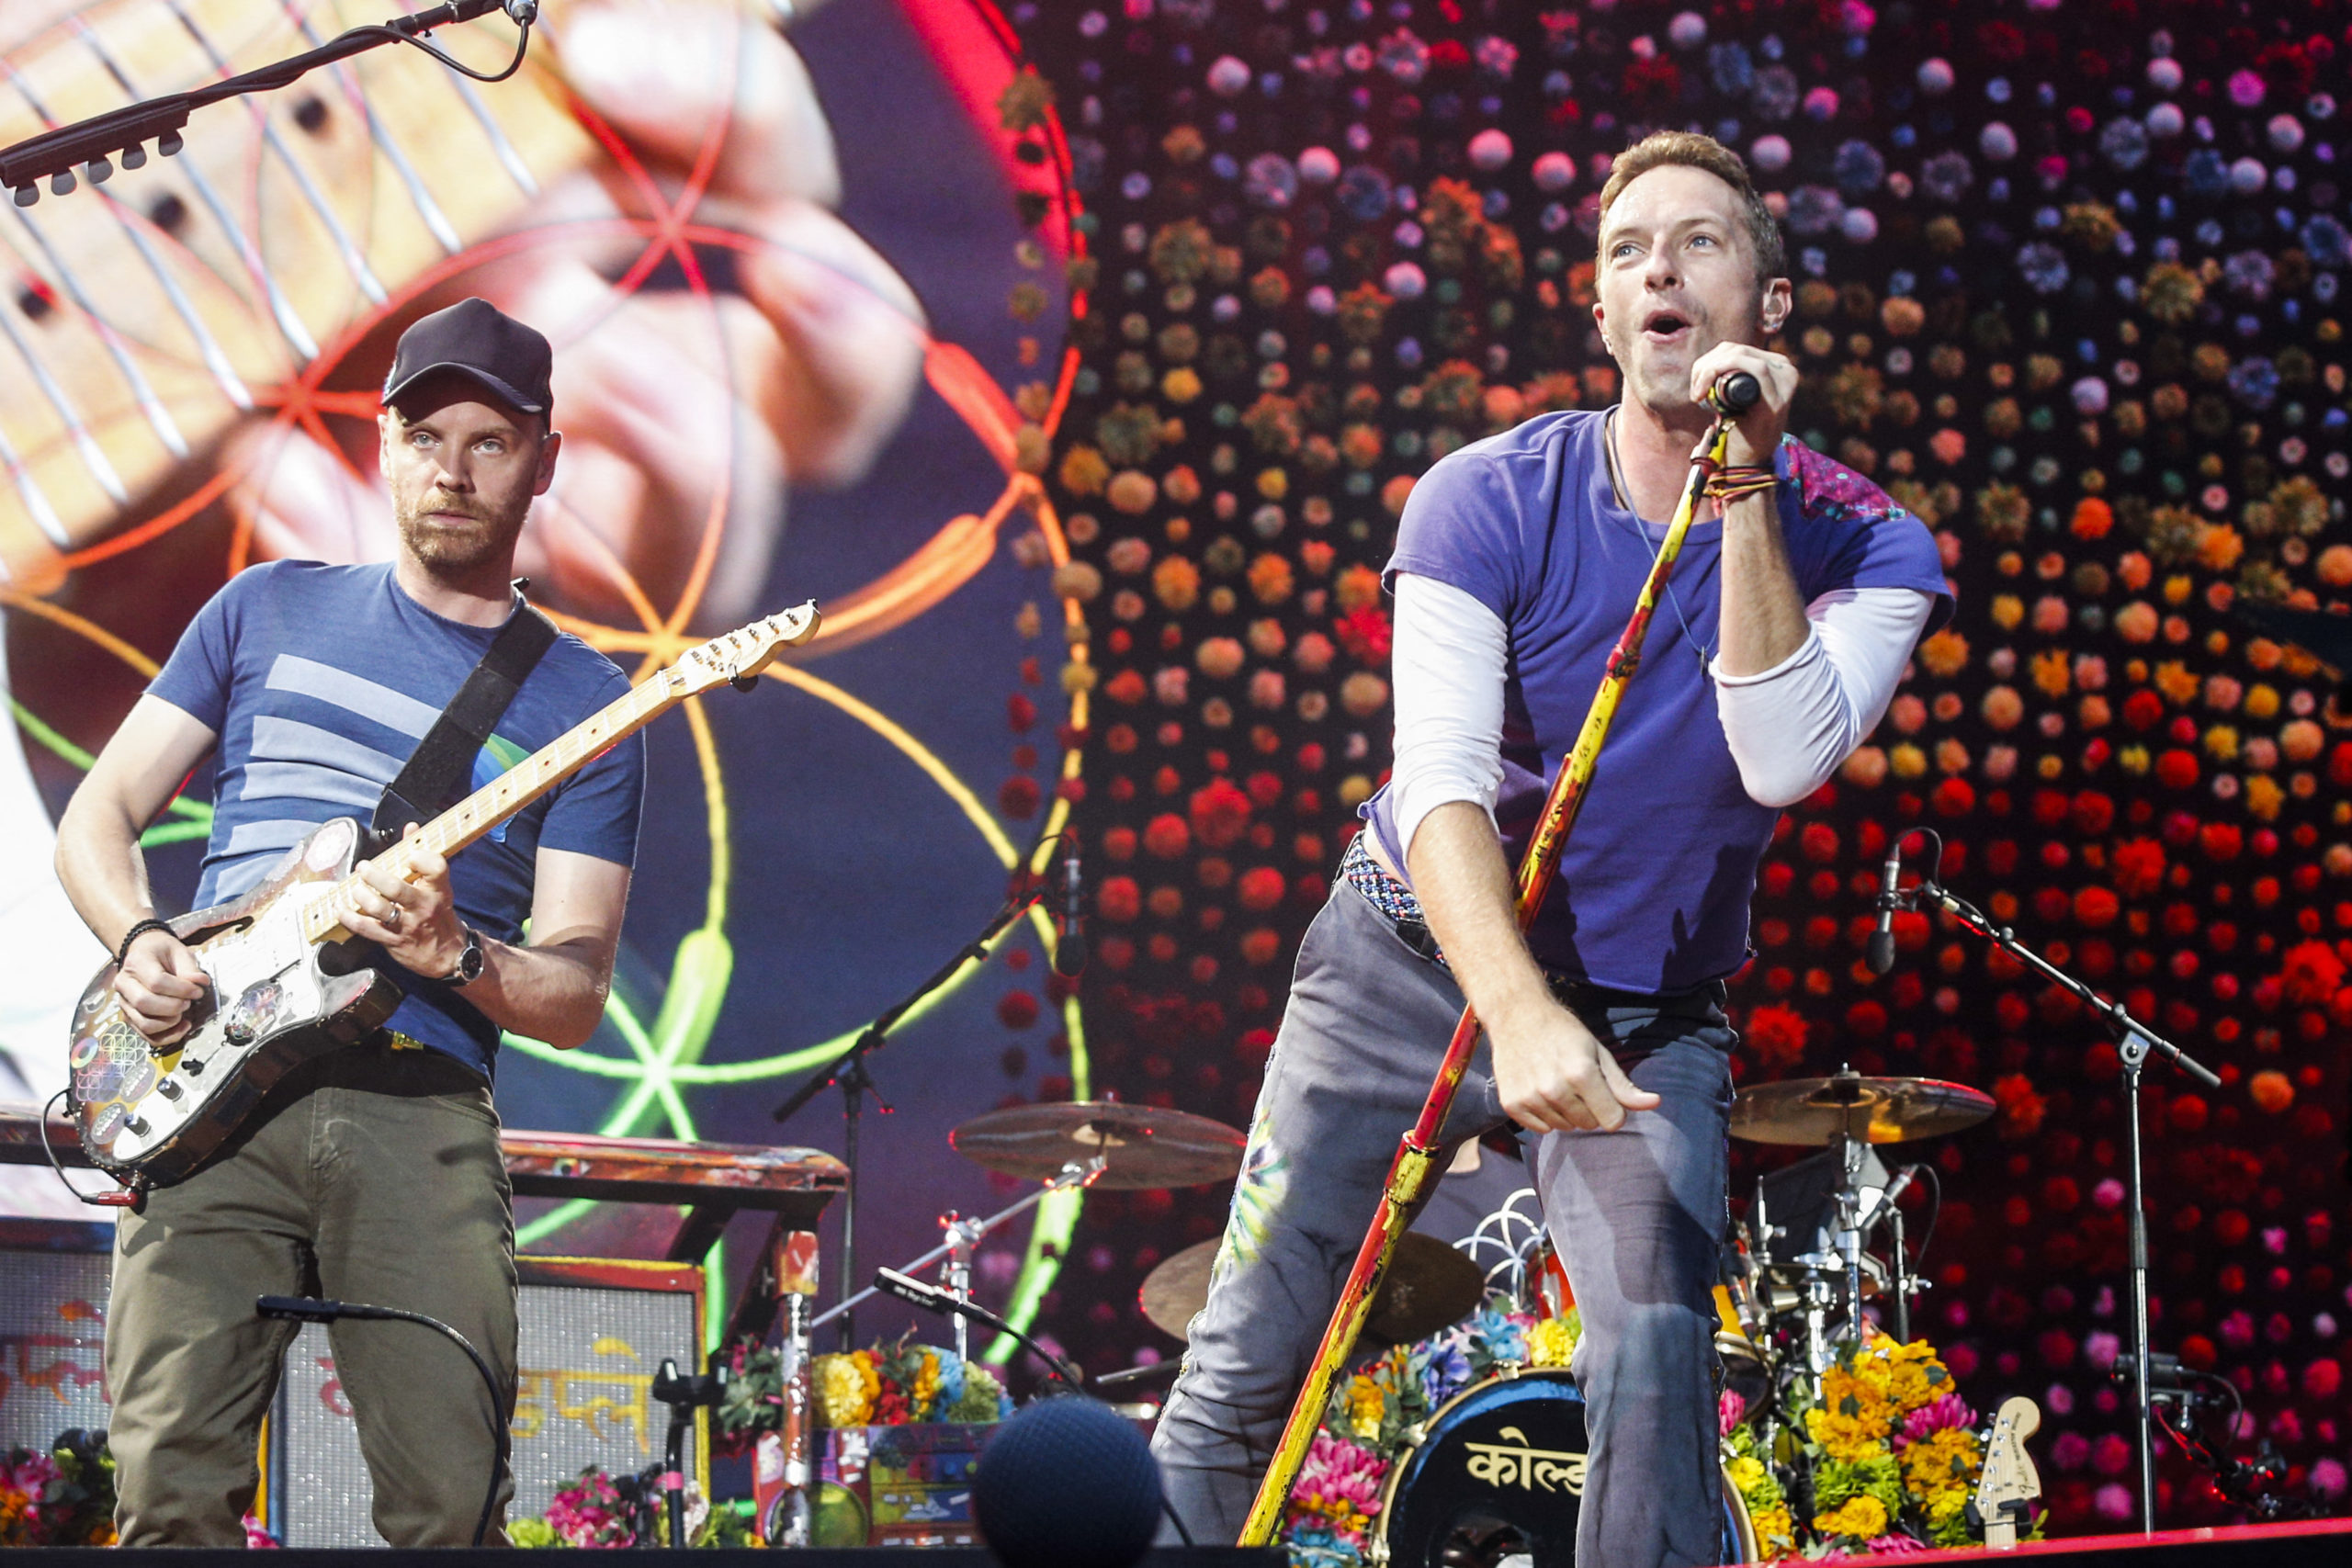 Coldplay frontman Chris Martin declares they will stop recording in 2025